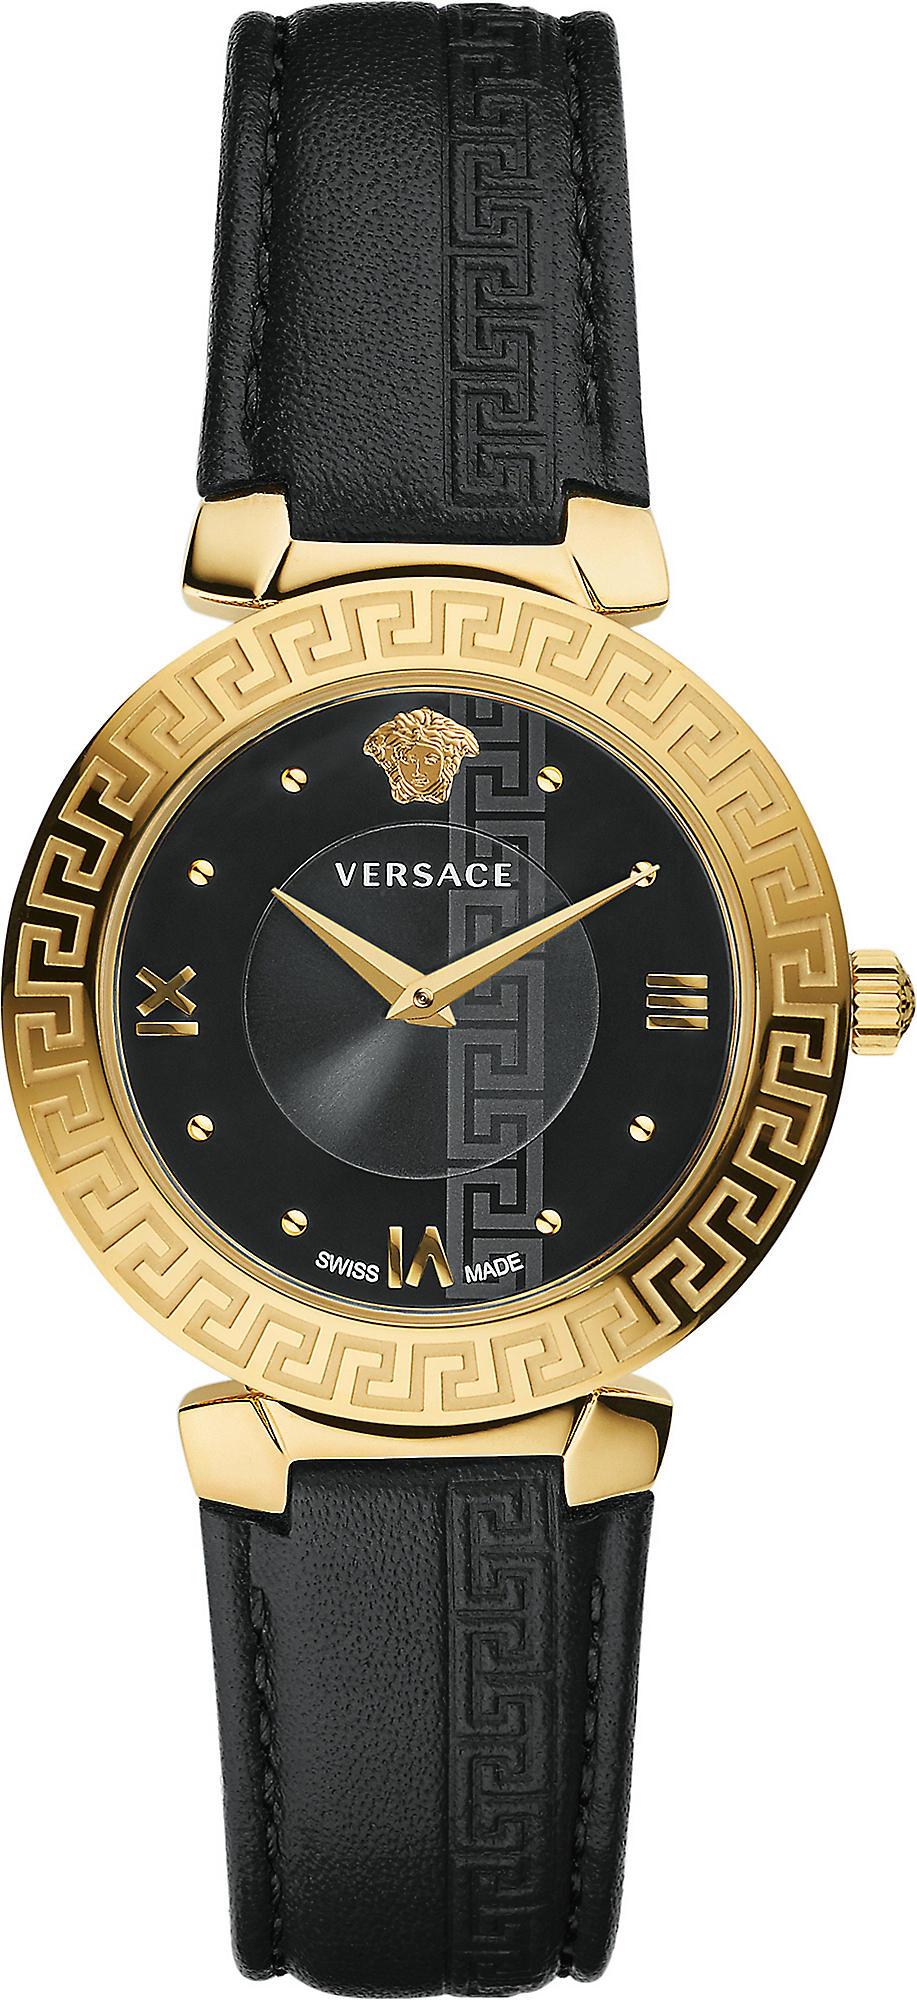 Versace Divine Gold And Leather Watch in Gold/Black (Metallic) - Lyst